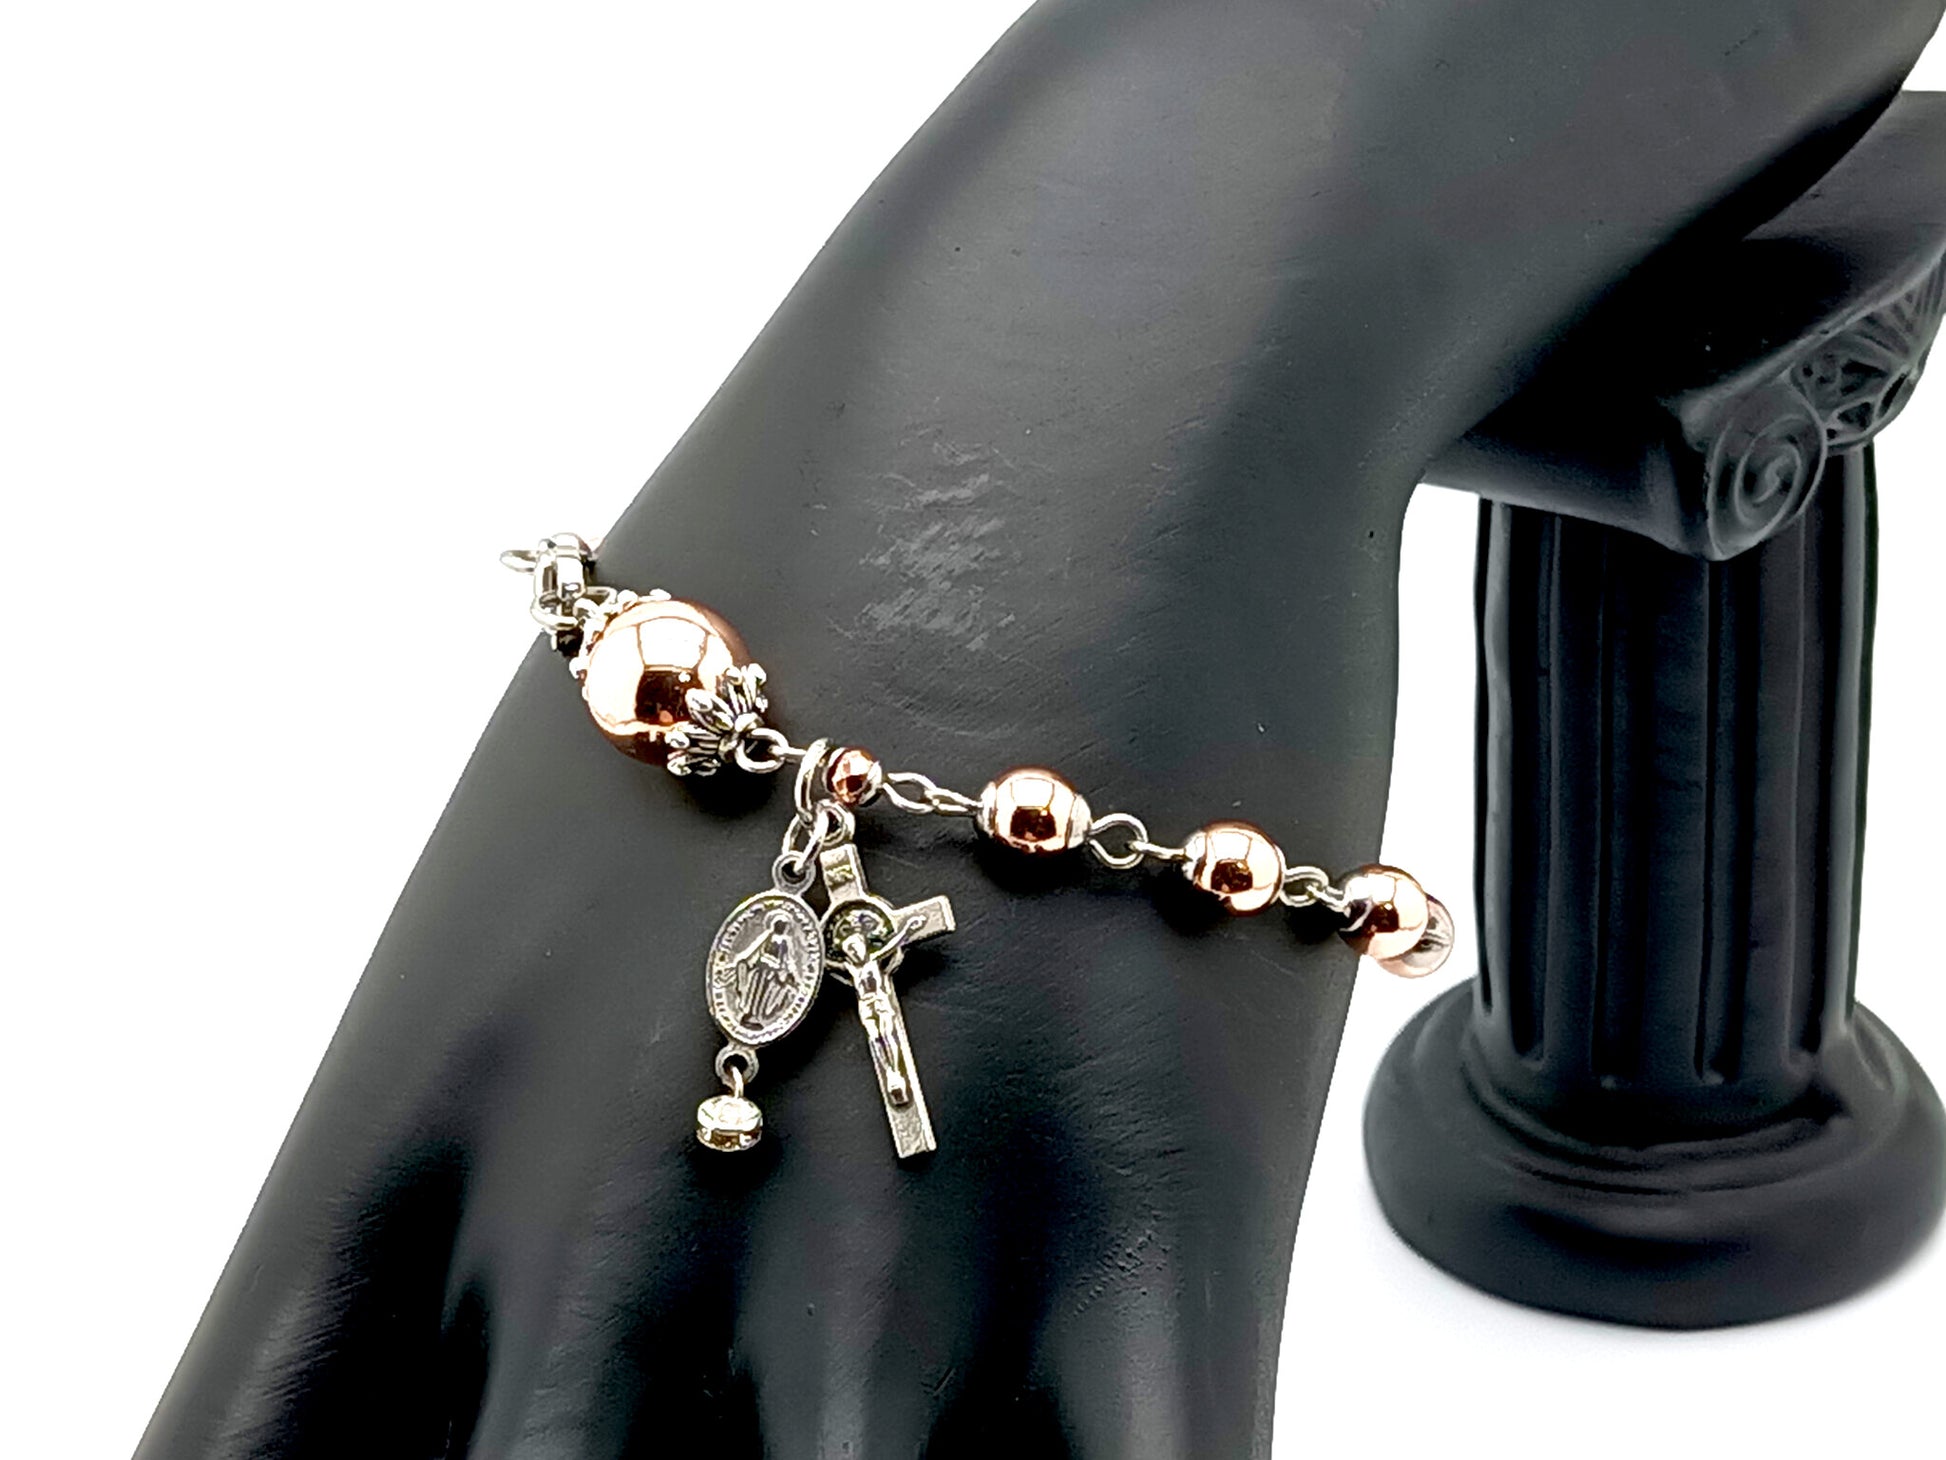 Miraculous medal unique rosary beads rose gold hematite gemstone single decade rosary bracelet and Saint Benedict crucifix.